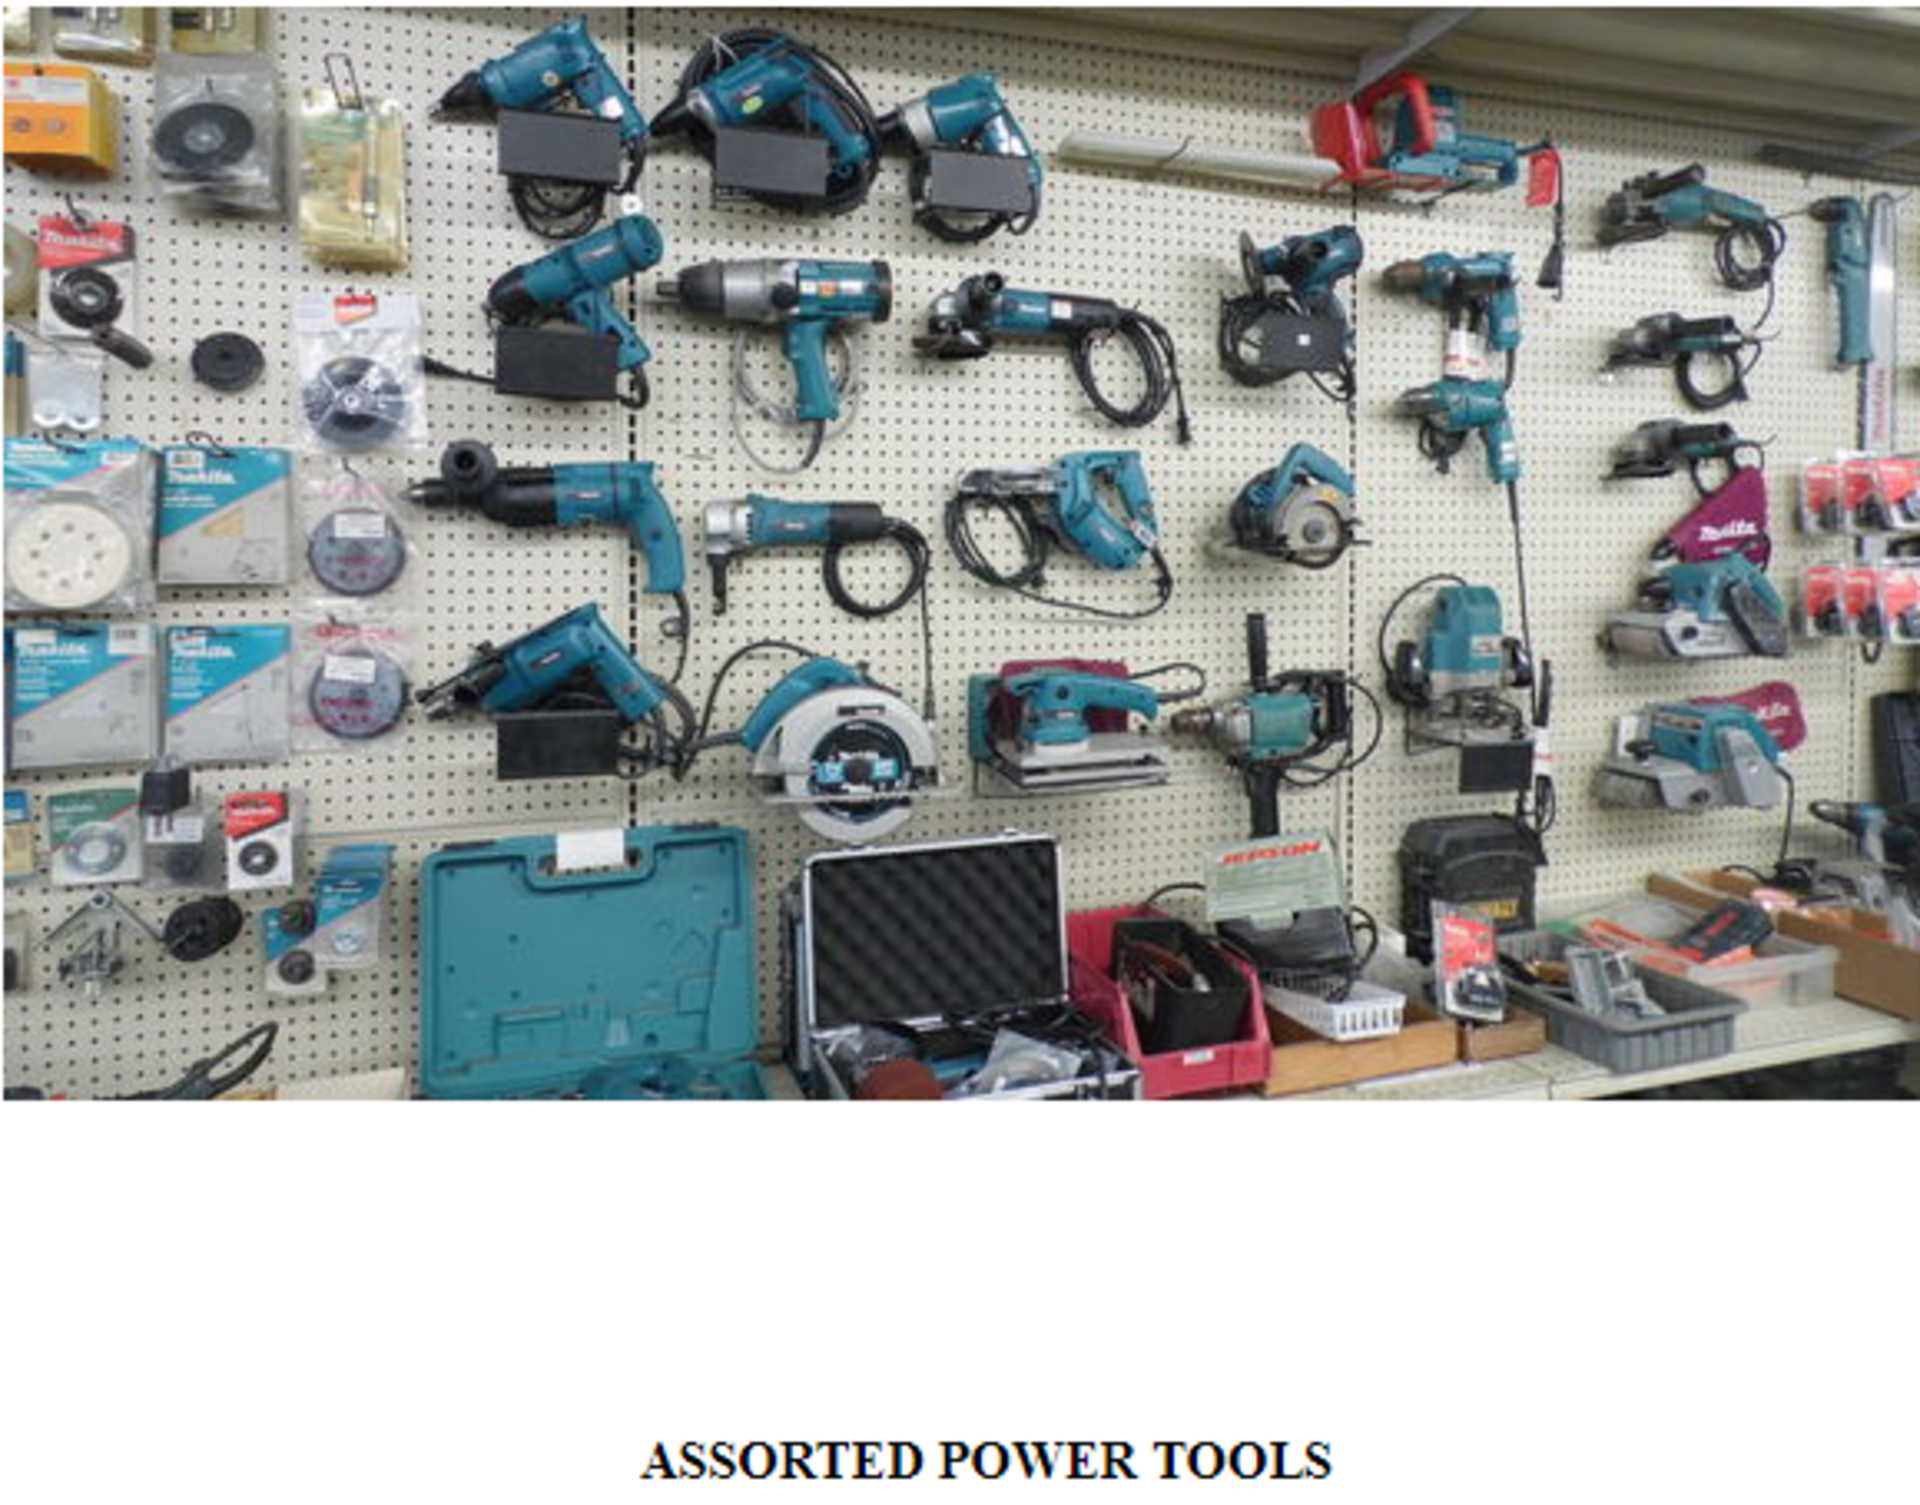 Catalog Coming! Tool Store Auction - Retiring after 38 years - Nice Assortment of Tools! - Image 4 of 5